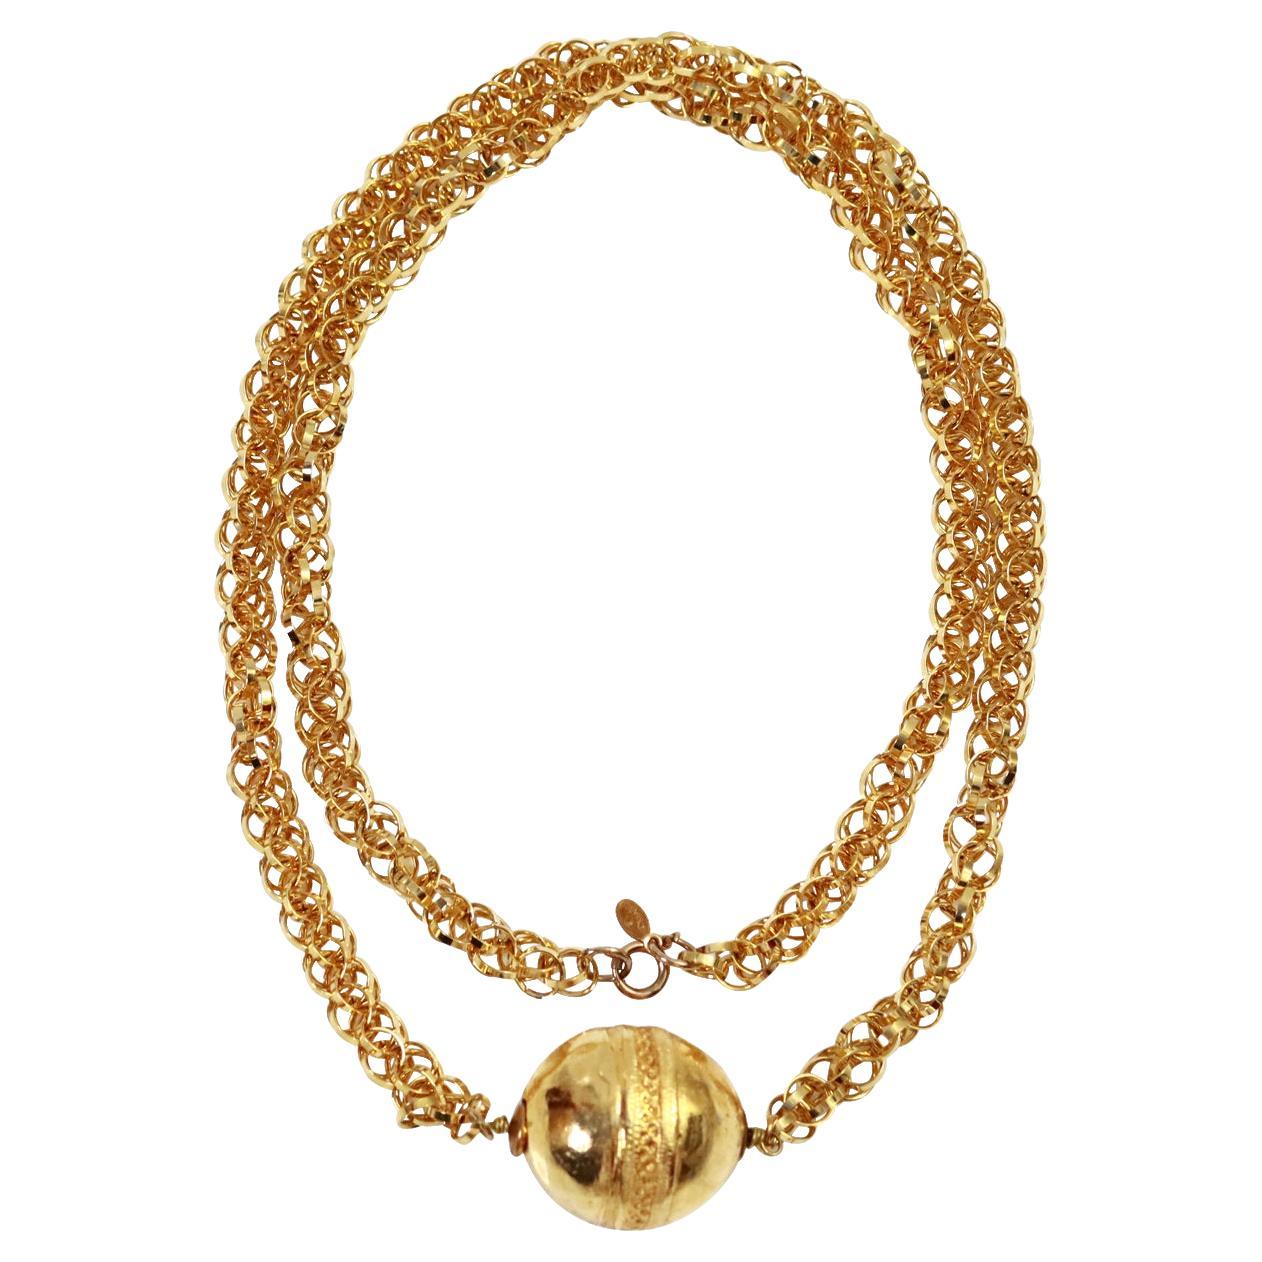 Vintage Cadoro Gold Tone Long Necklace with Ball Circa 1980s.  Very chic. This is an unusual necklace and so well made.  It can be worn long or doubled.  The oblong ball has a hammered look to it and the middle of the piece has a very intricate